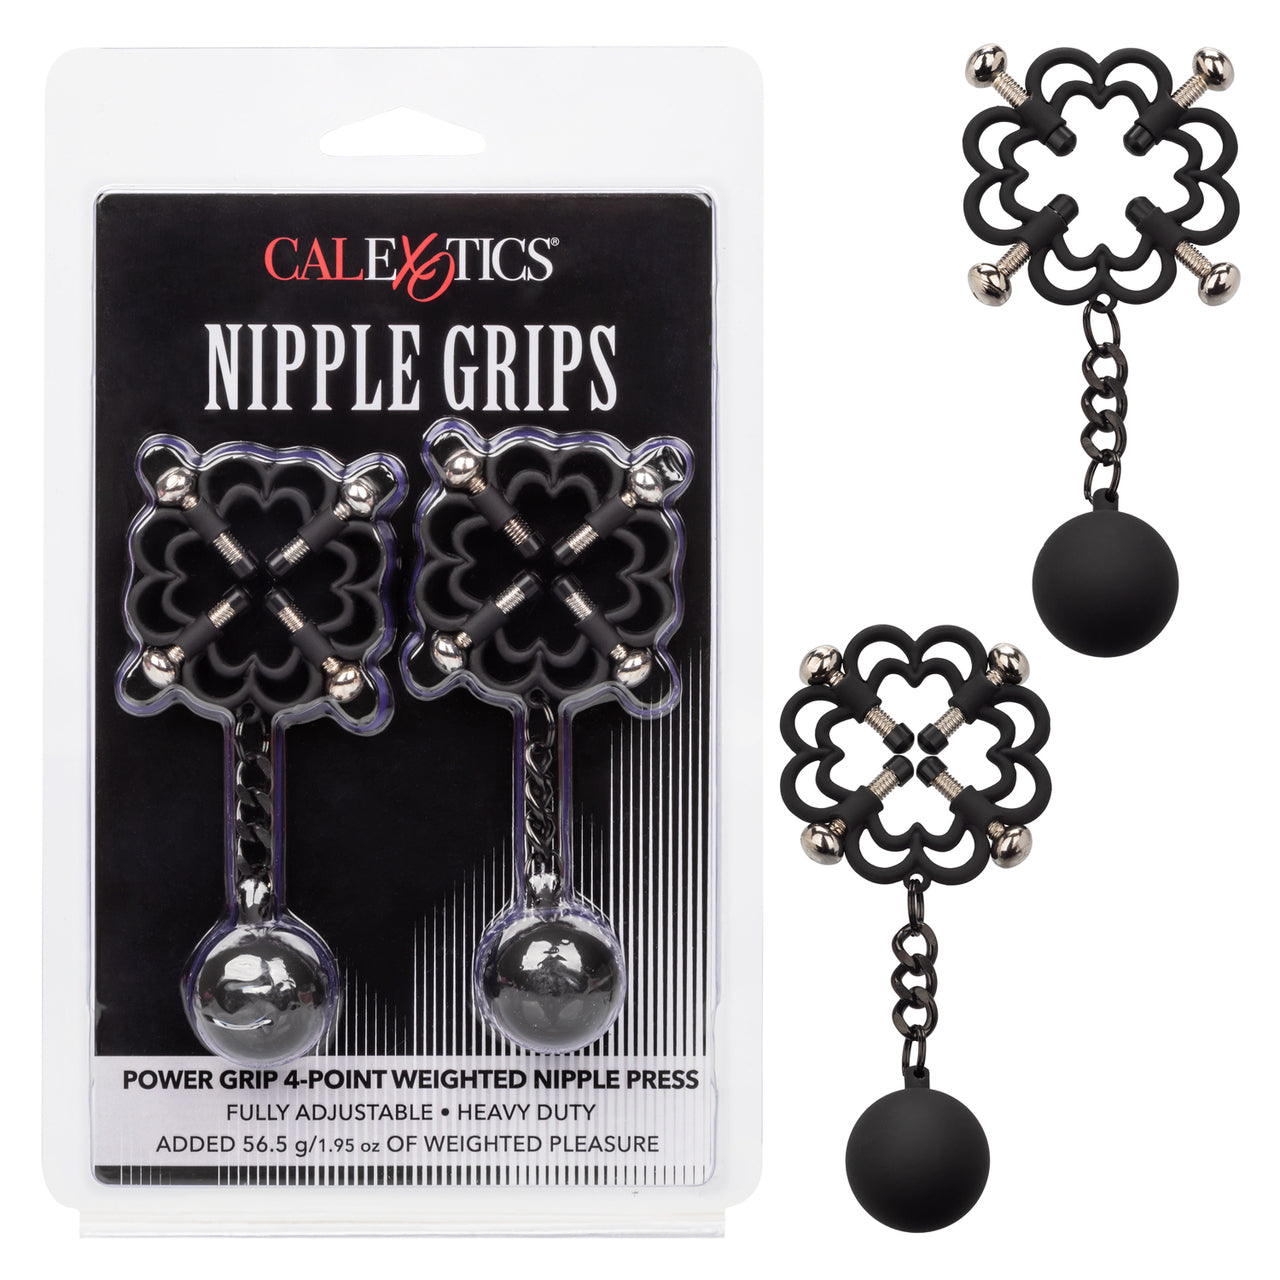 Nipple Grips Power Grip 4 Point Weighted Nipple Press Black Shop 